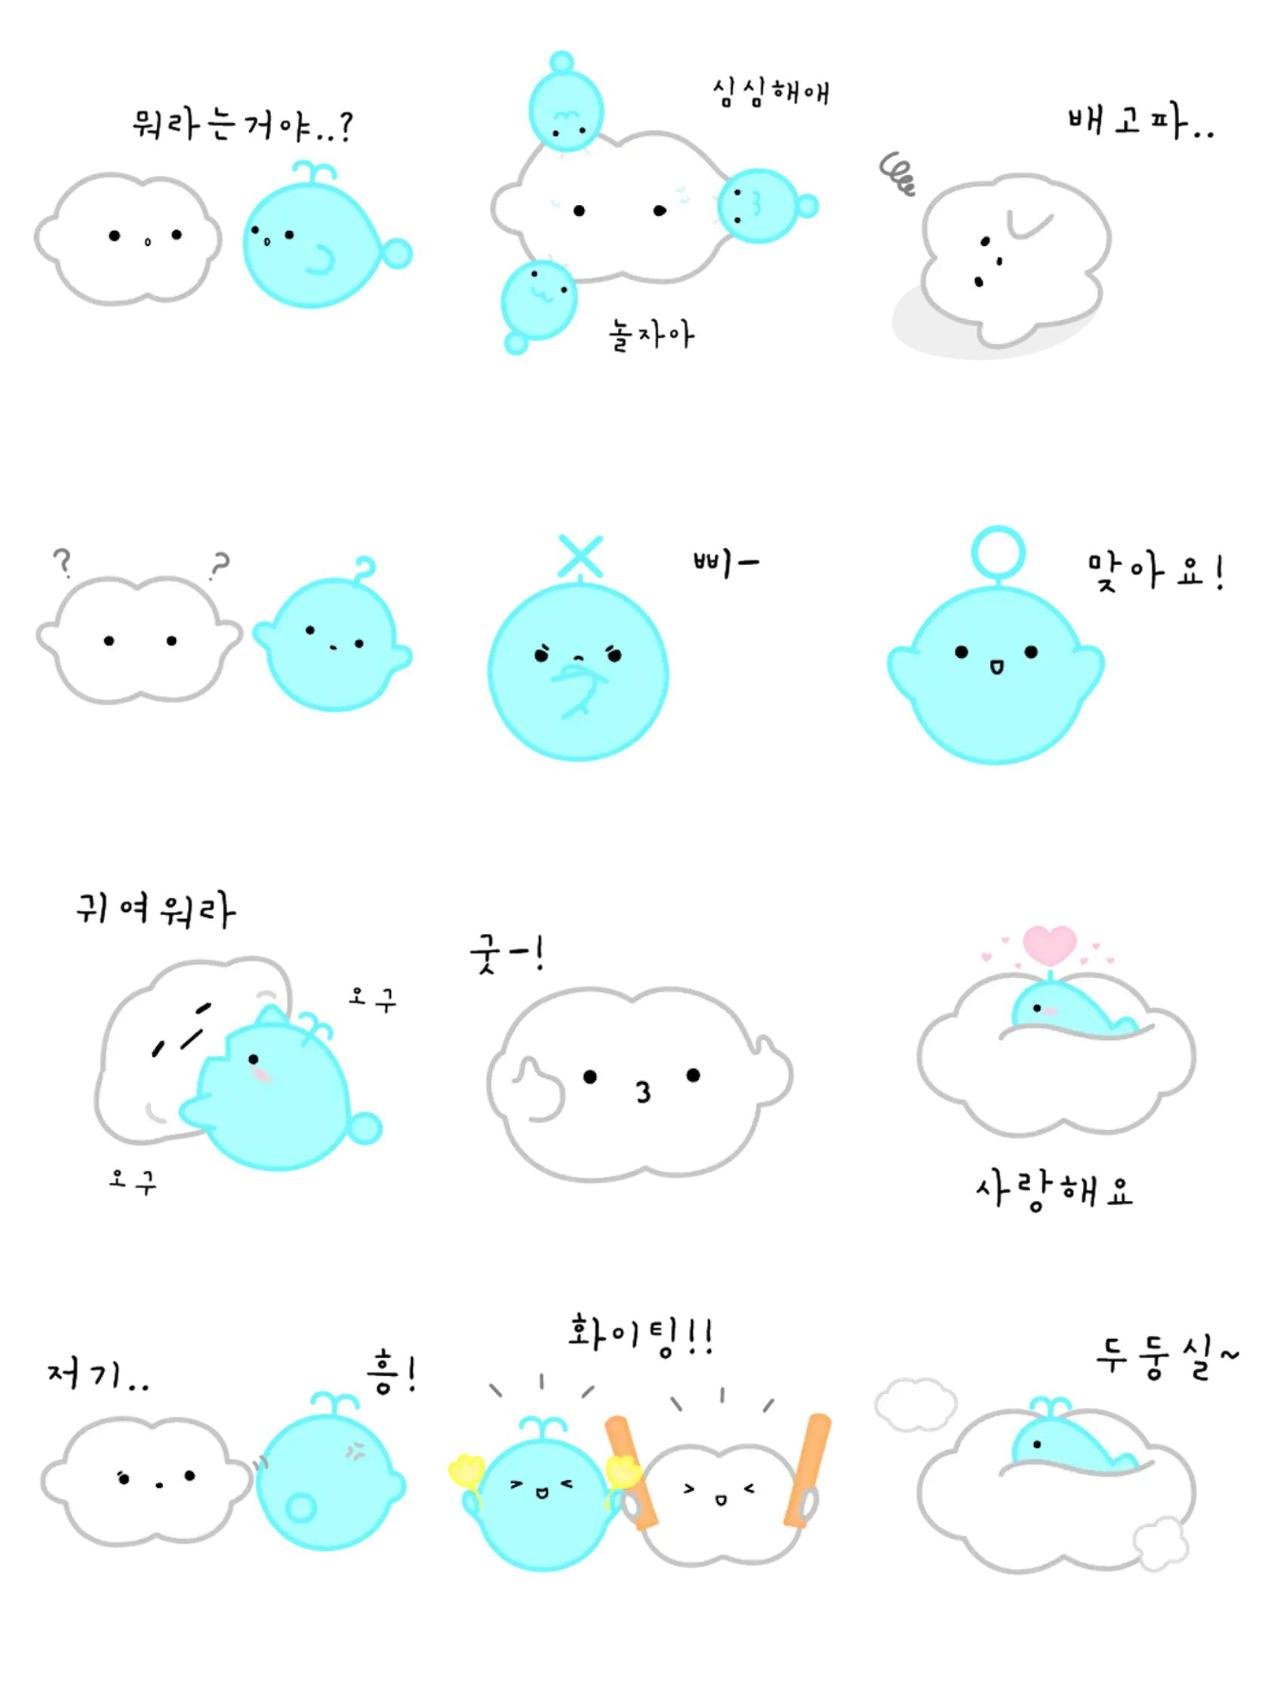 the whale and the cloud Animals,Romance sticker pack for Whatsapp, Telegram, Signal, and others chatting and message apps